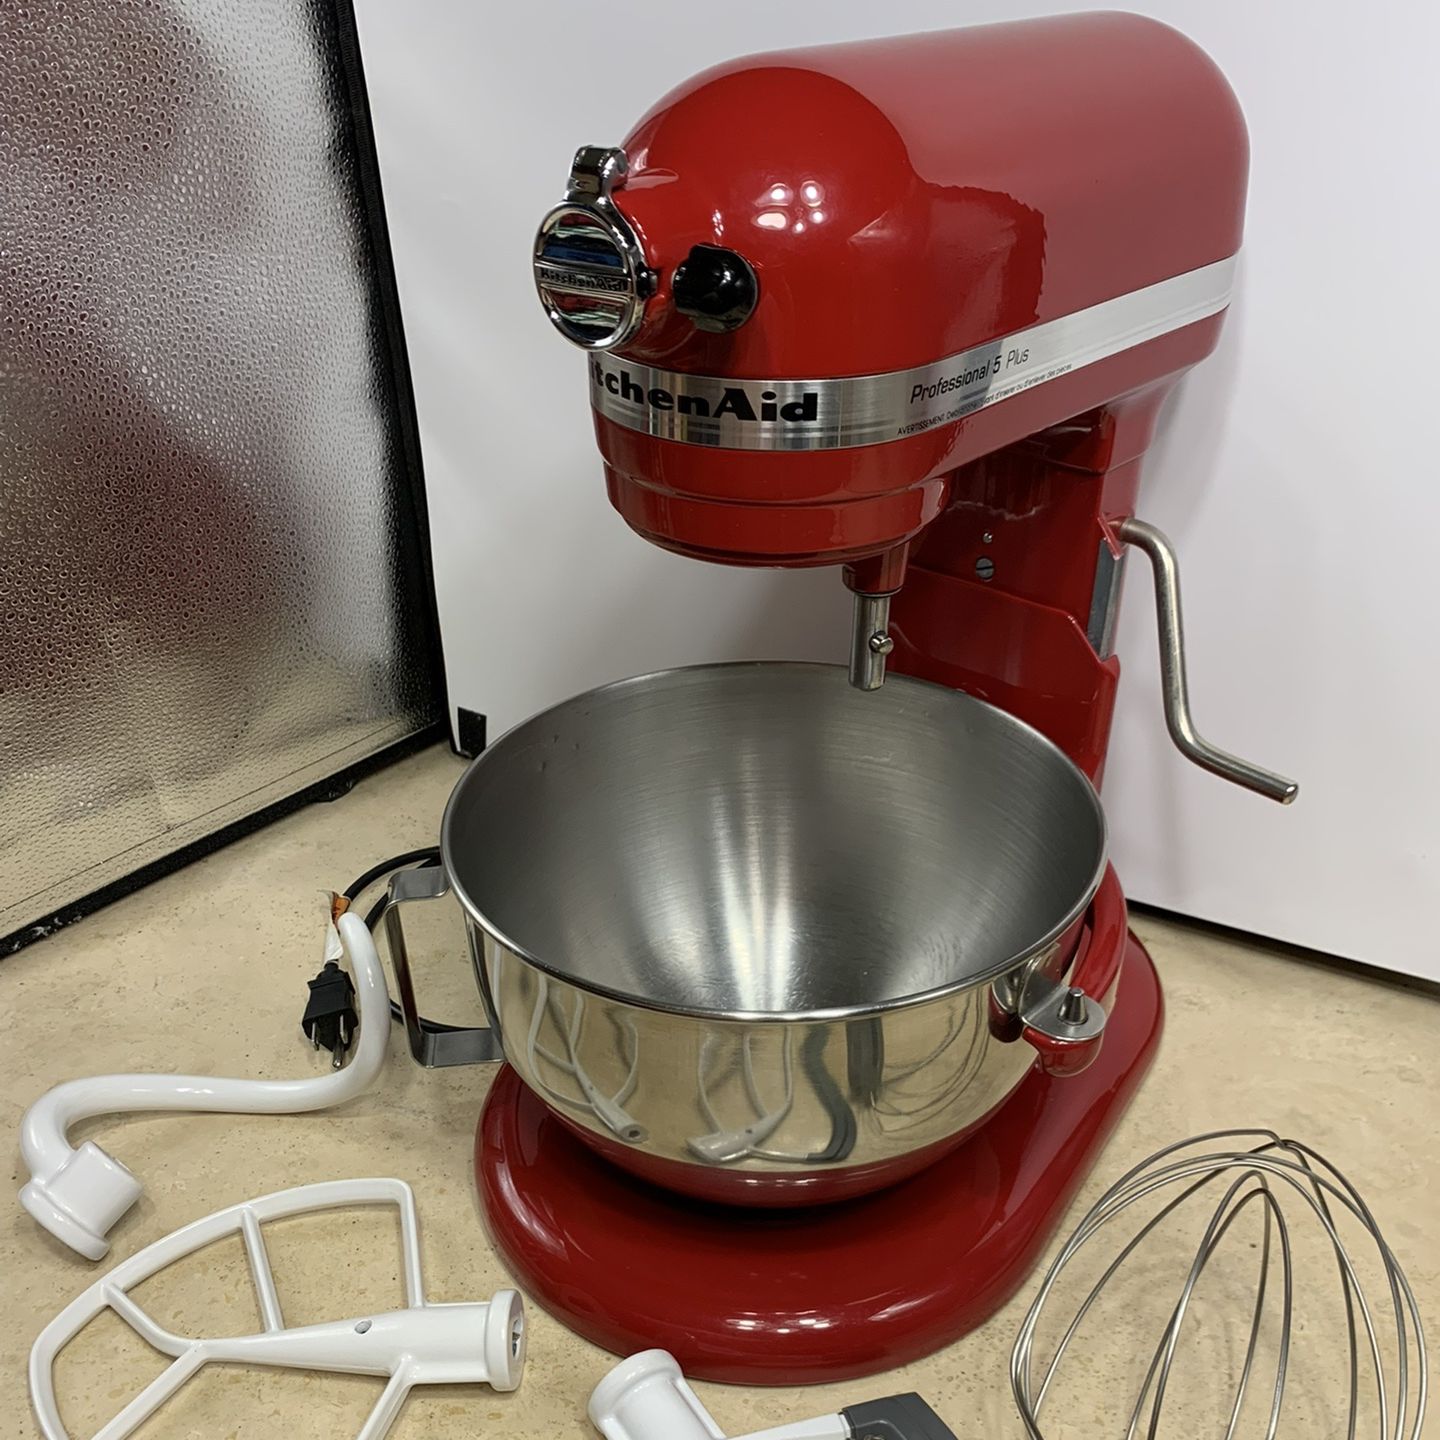 *PRICE REDUCED*KitchenAid Professional 5 Plus Series 5 Quart Bowl-Lift Stand  Mixer *Price Negotiable* for Sale in Poughkeepsie, NY - OfferUp